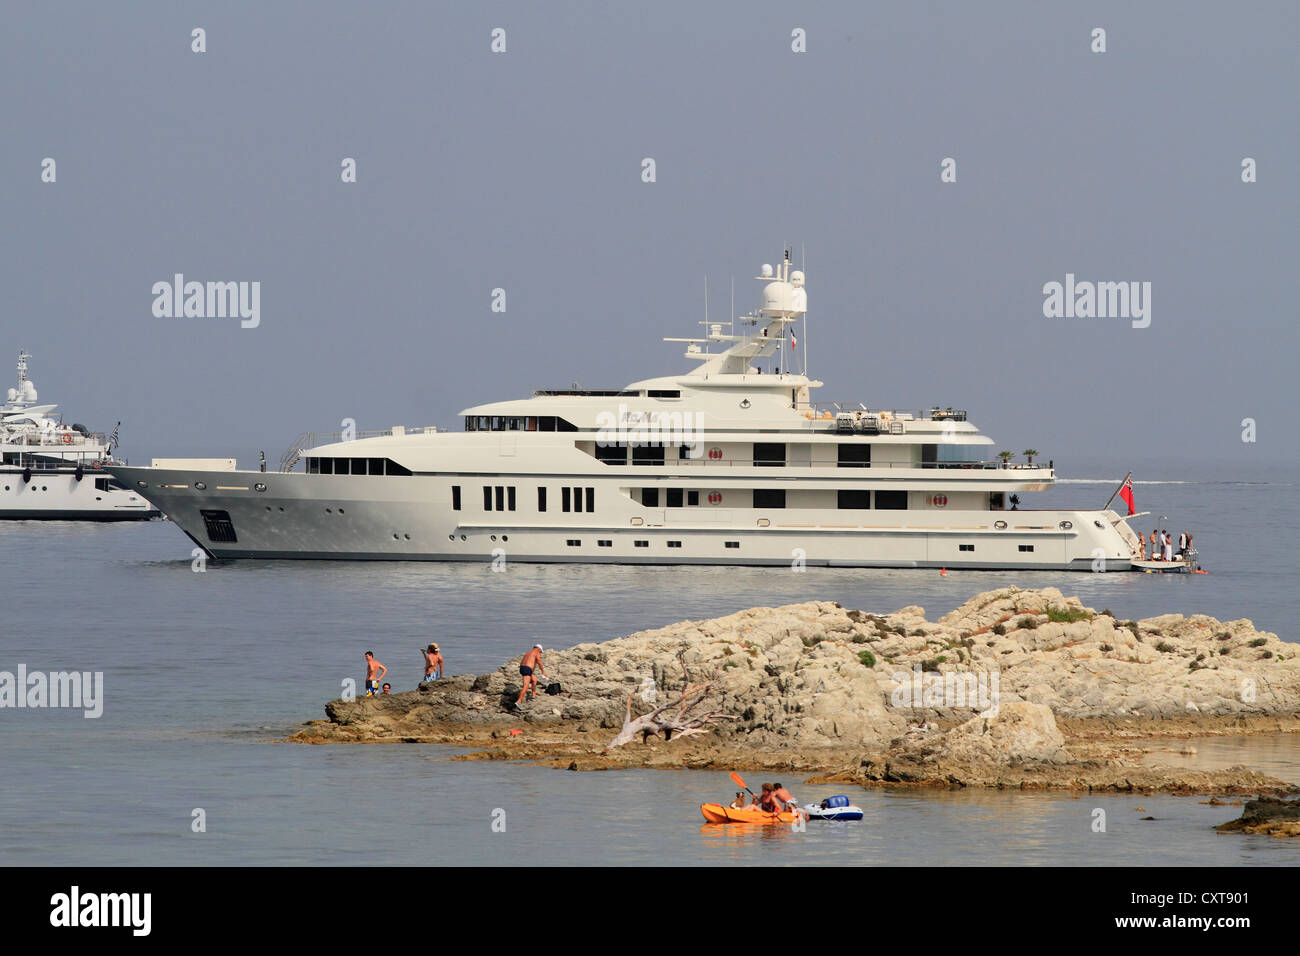 RoMa, a cruiser built by Viareggio Superyachts, length: 61, 80 meters, built in 2009, French Riviera, France, Europe Stock Photo